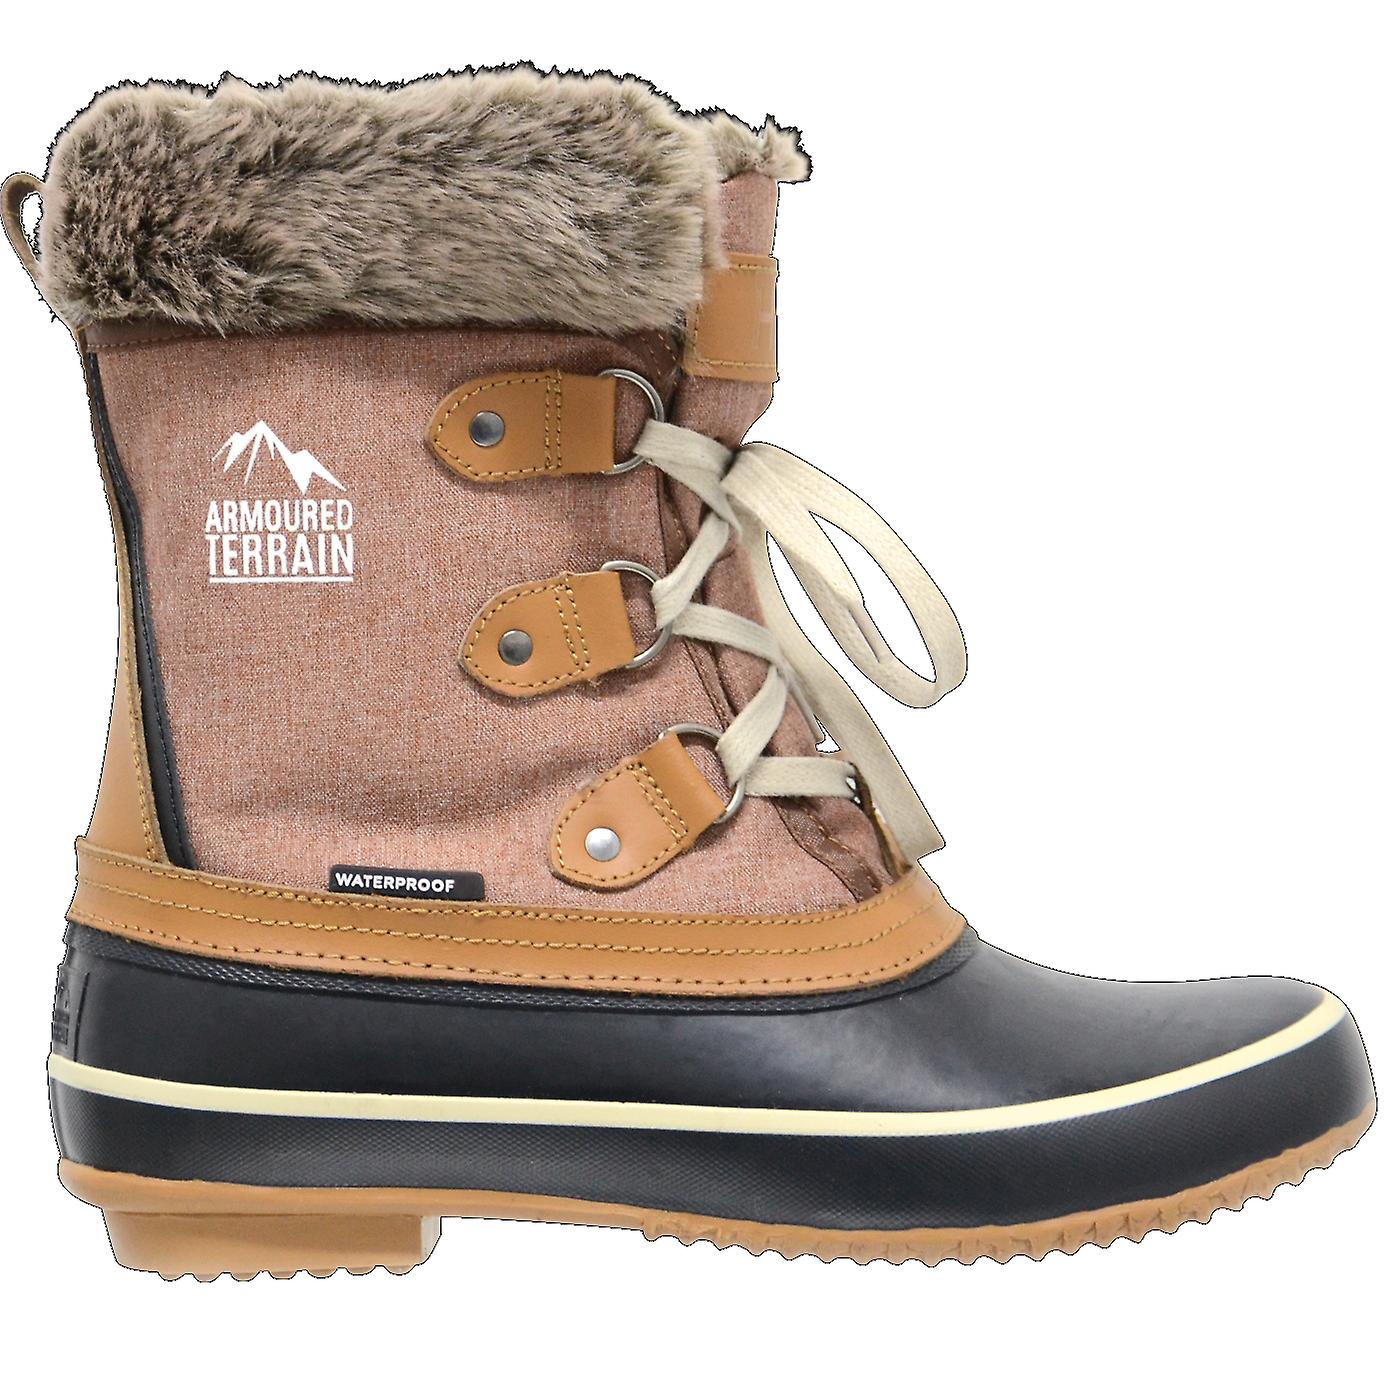 HyLAND Adults Short Mont Blanc Winter Boots